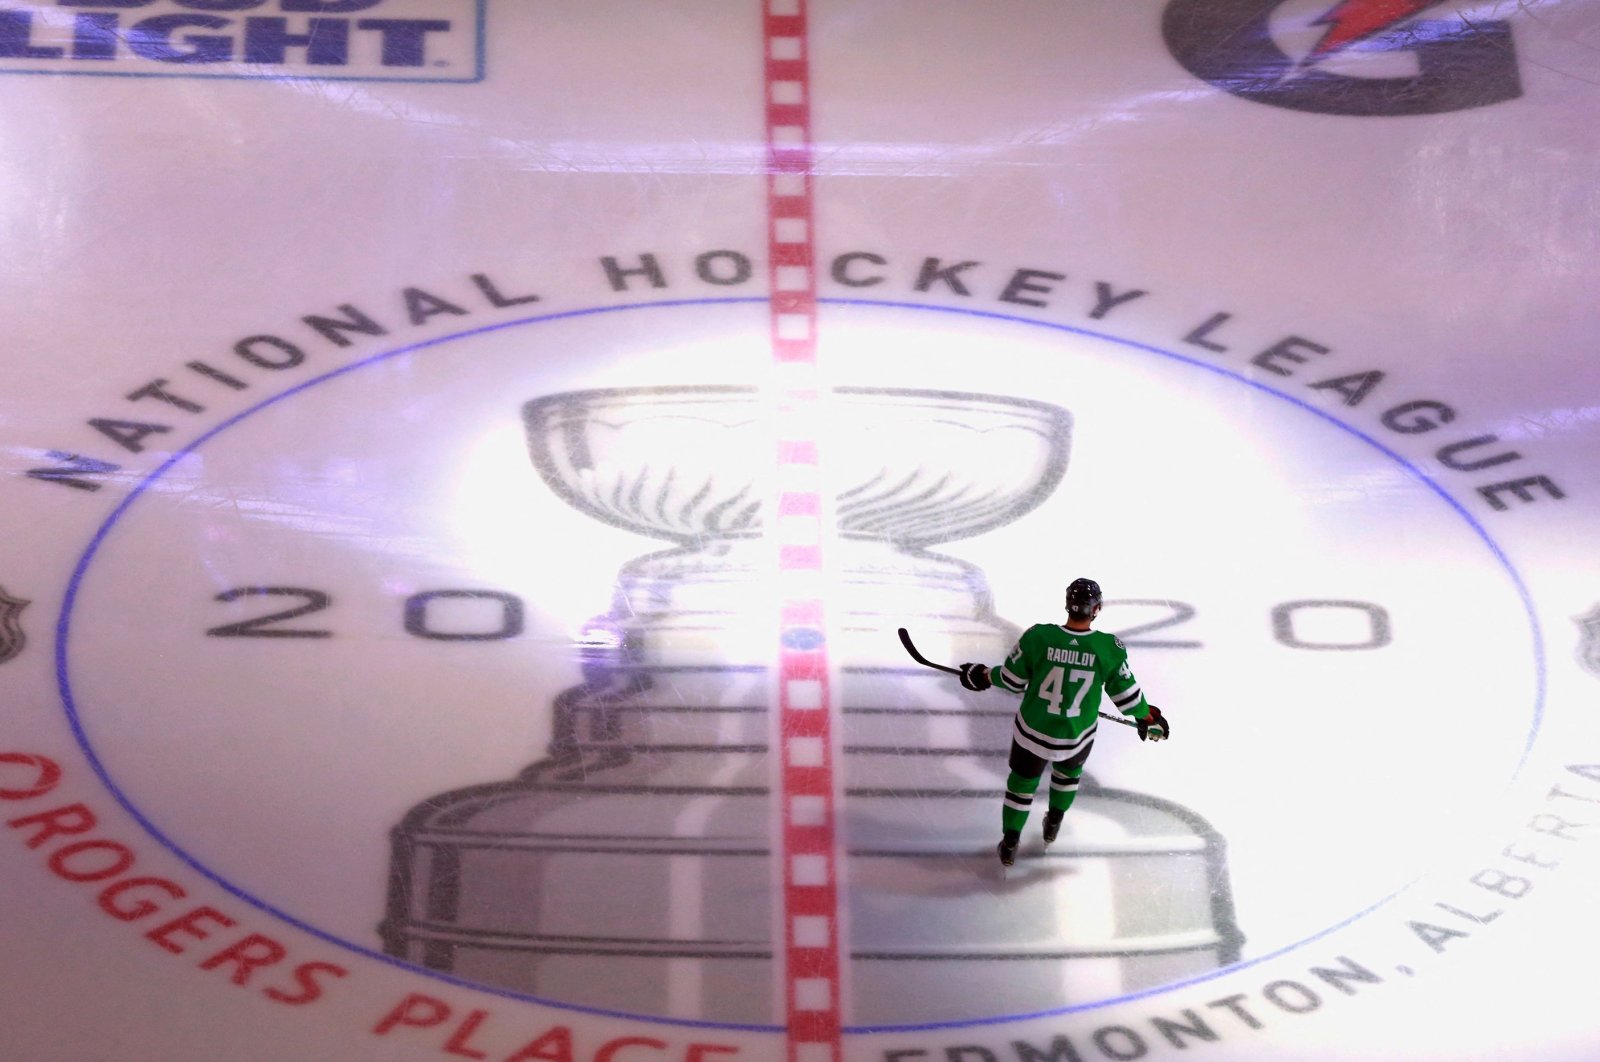 Alexander Radulov of the Dallas Stars skates over the Stanley Cup logo prior to the exhibition game against the Nashville Predators before the 2020 NHL Stanley Cup Playoffs in Edmonton, Alberta, Canada, July 30, 2020. (AFP Photo)